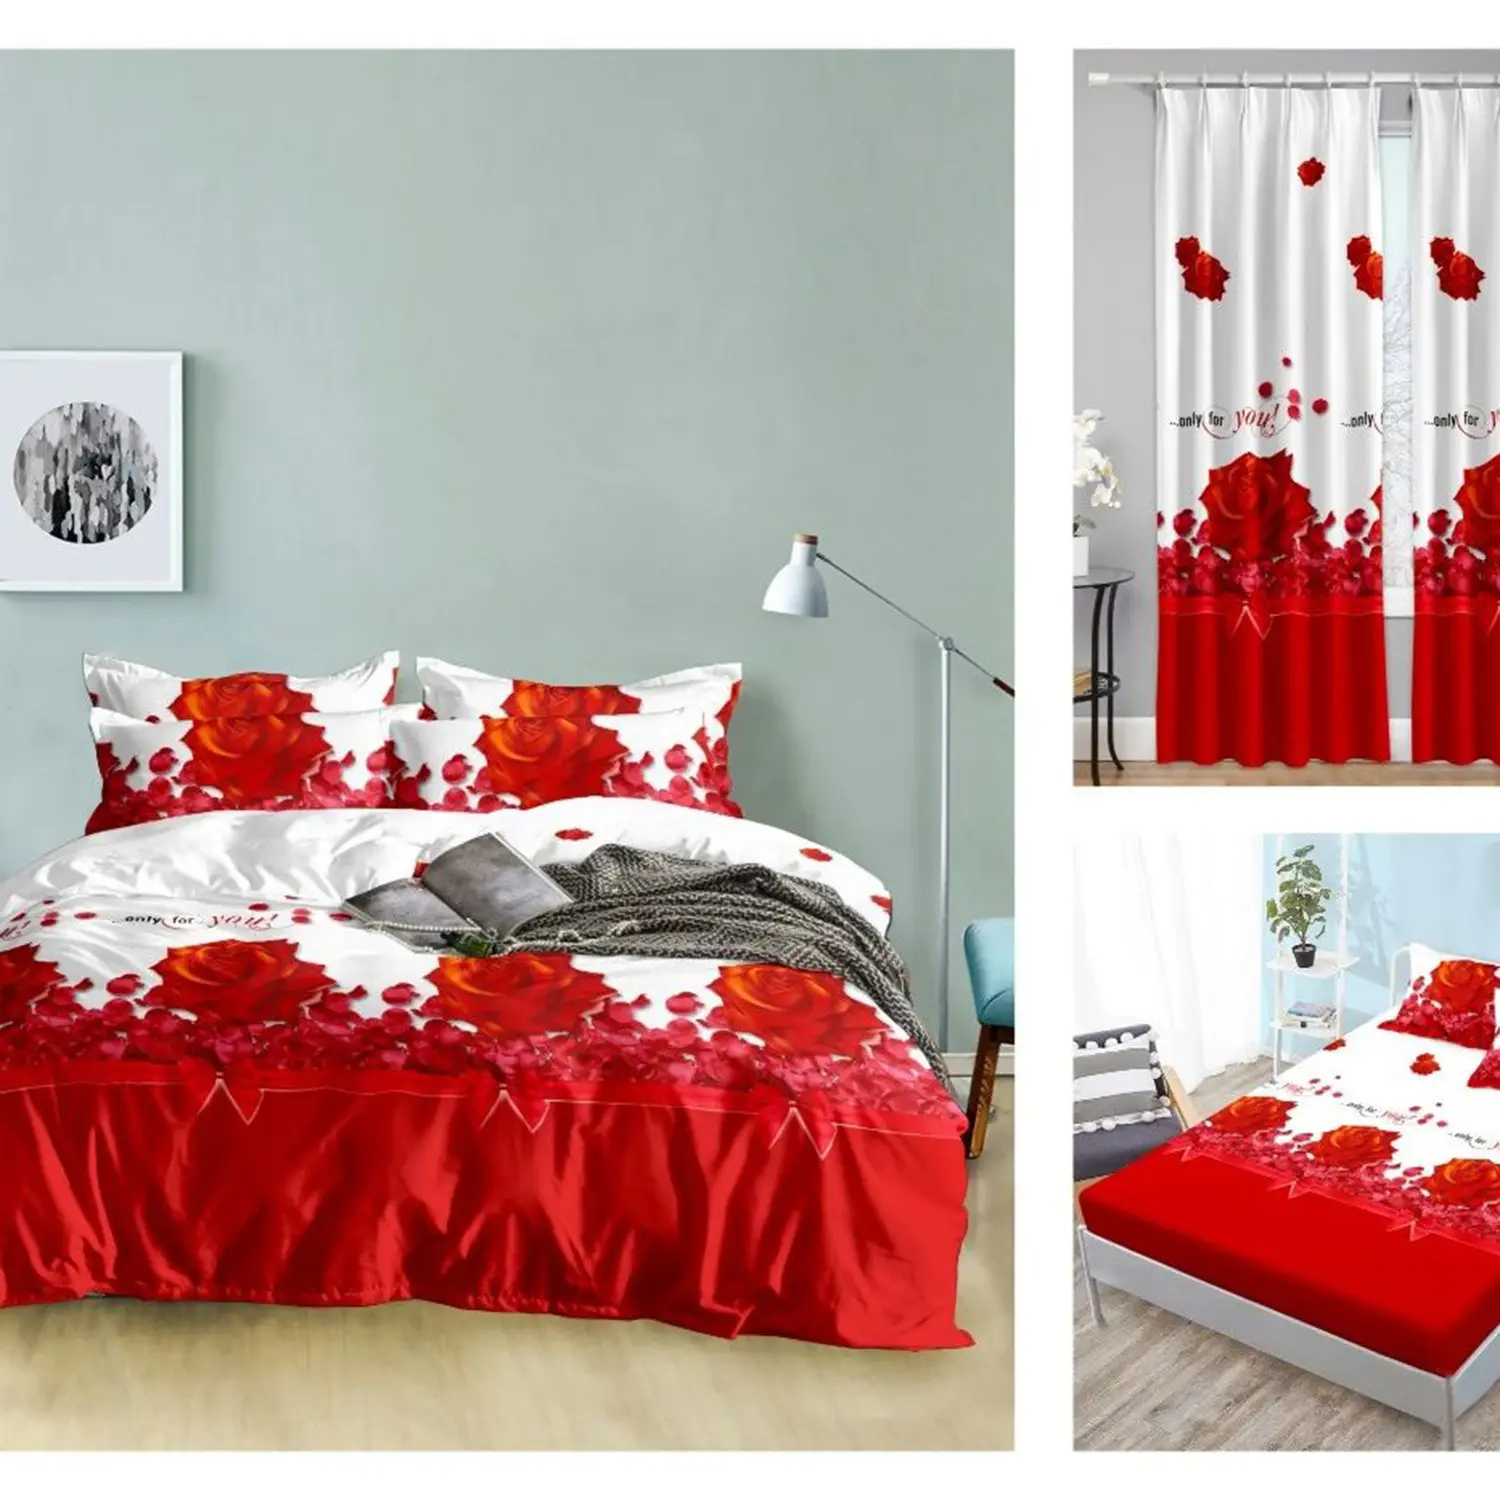 Polyester Printed White Black Heart Patterns Bed Sheets Cotton Bedroom bedding Set Matching Curtains